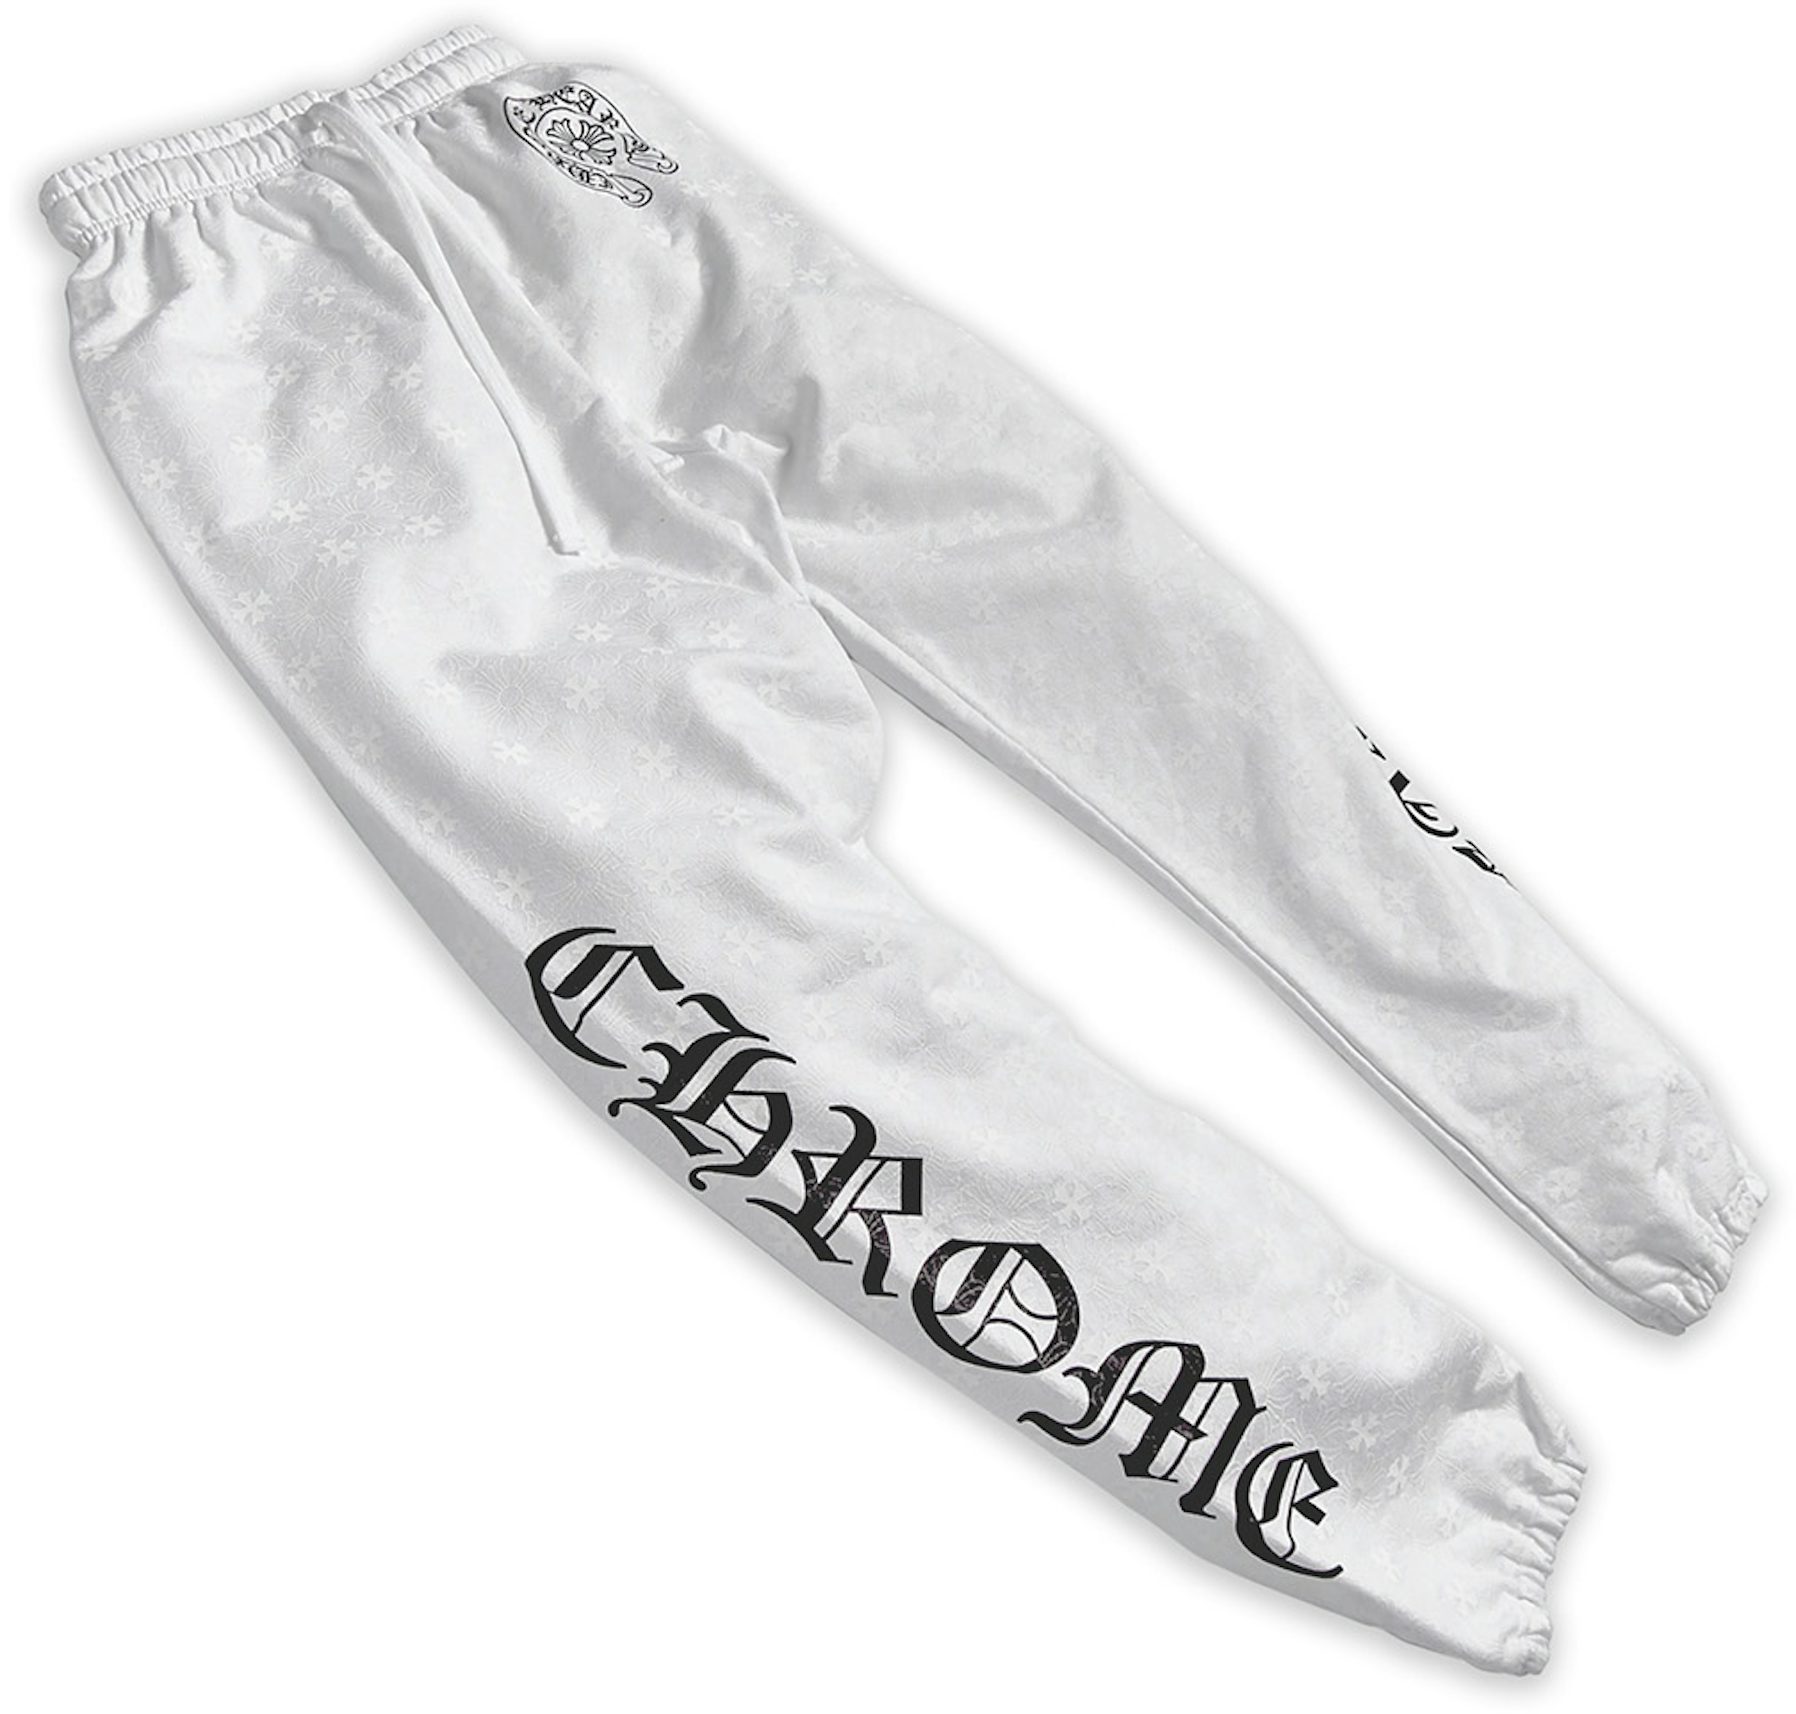  Chrome Heart Chrome Hearts Classic Black White Patch Jeans  for Men and Women Same Section Trouser Couple Section Straight Casual Pants  Sweatpants : Clothing, Shoes & Jewelry